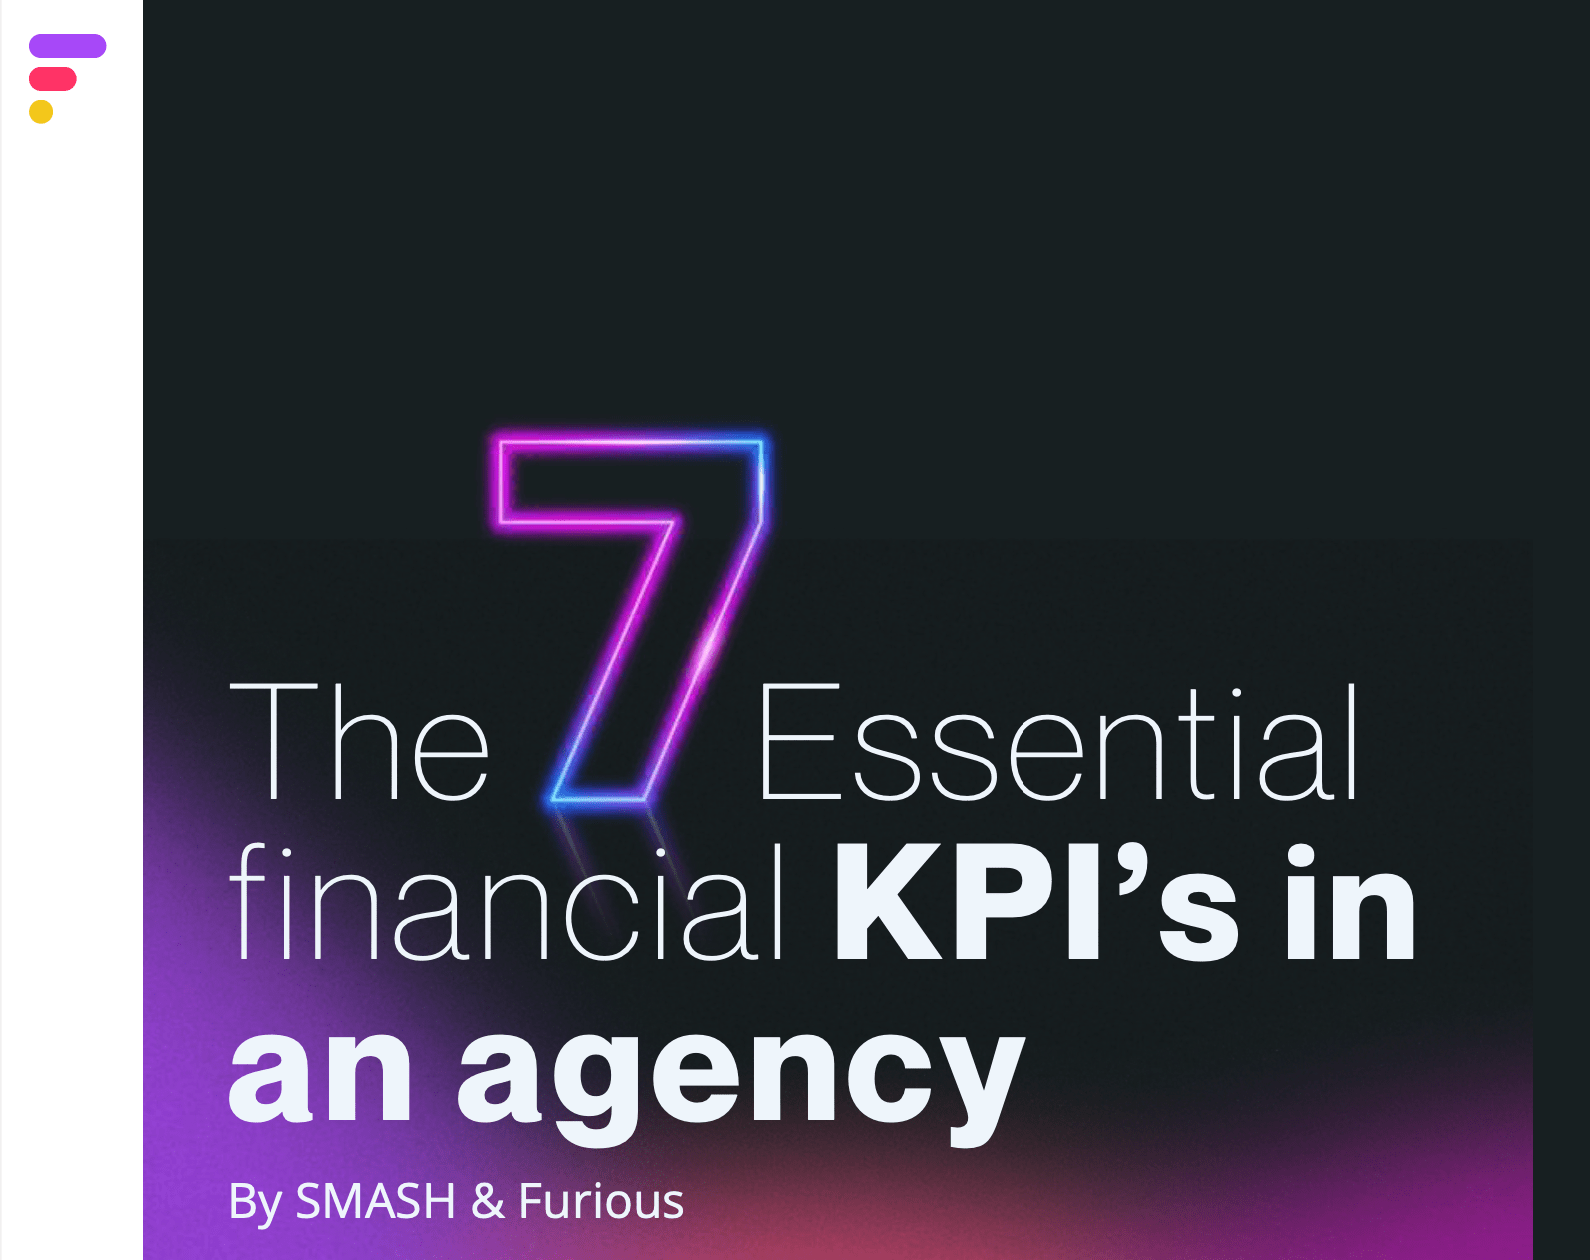 The 7 essential financial KPI's in an agency